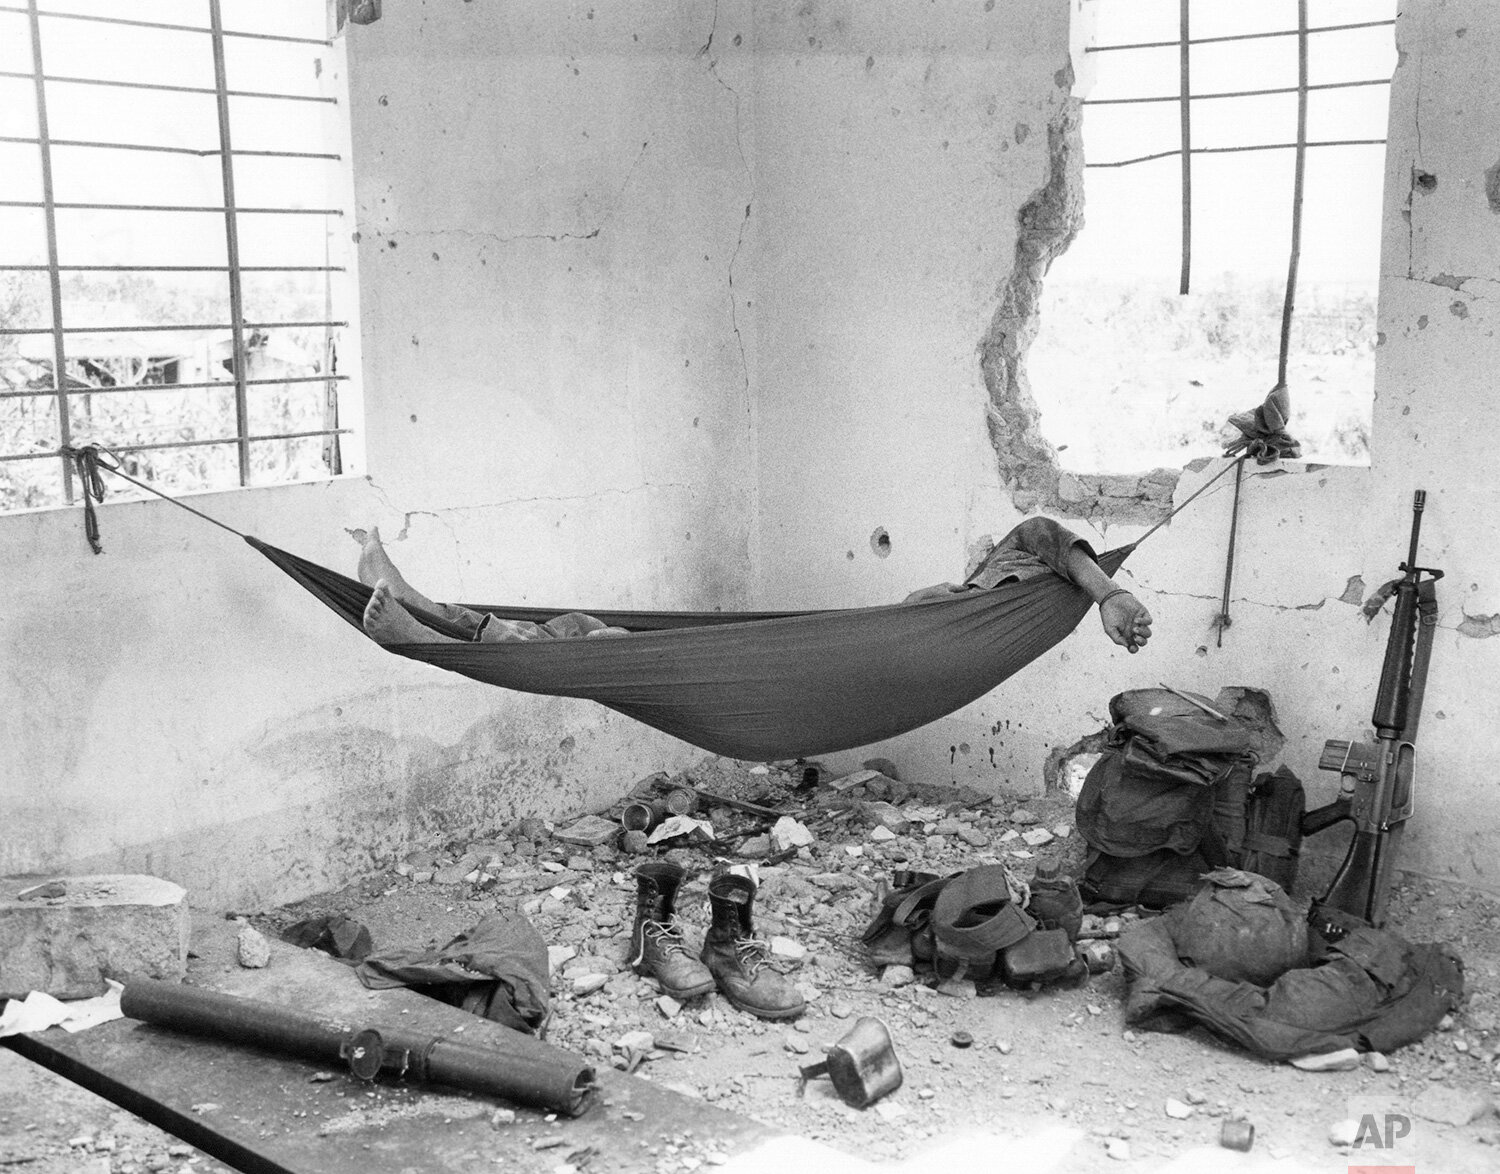  A South Vietnamese Marine naps in a hammock in an abandoned house in Quang Tri City, Vietnam, on Aug. 24, 1972, his weapons and equipment nearby. (AP Photo/Nick Ut) 